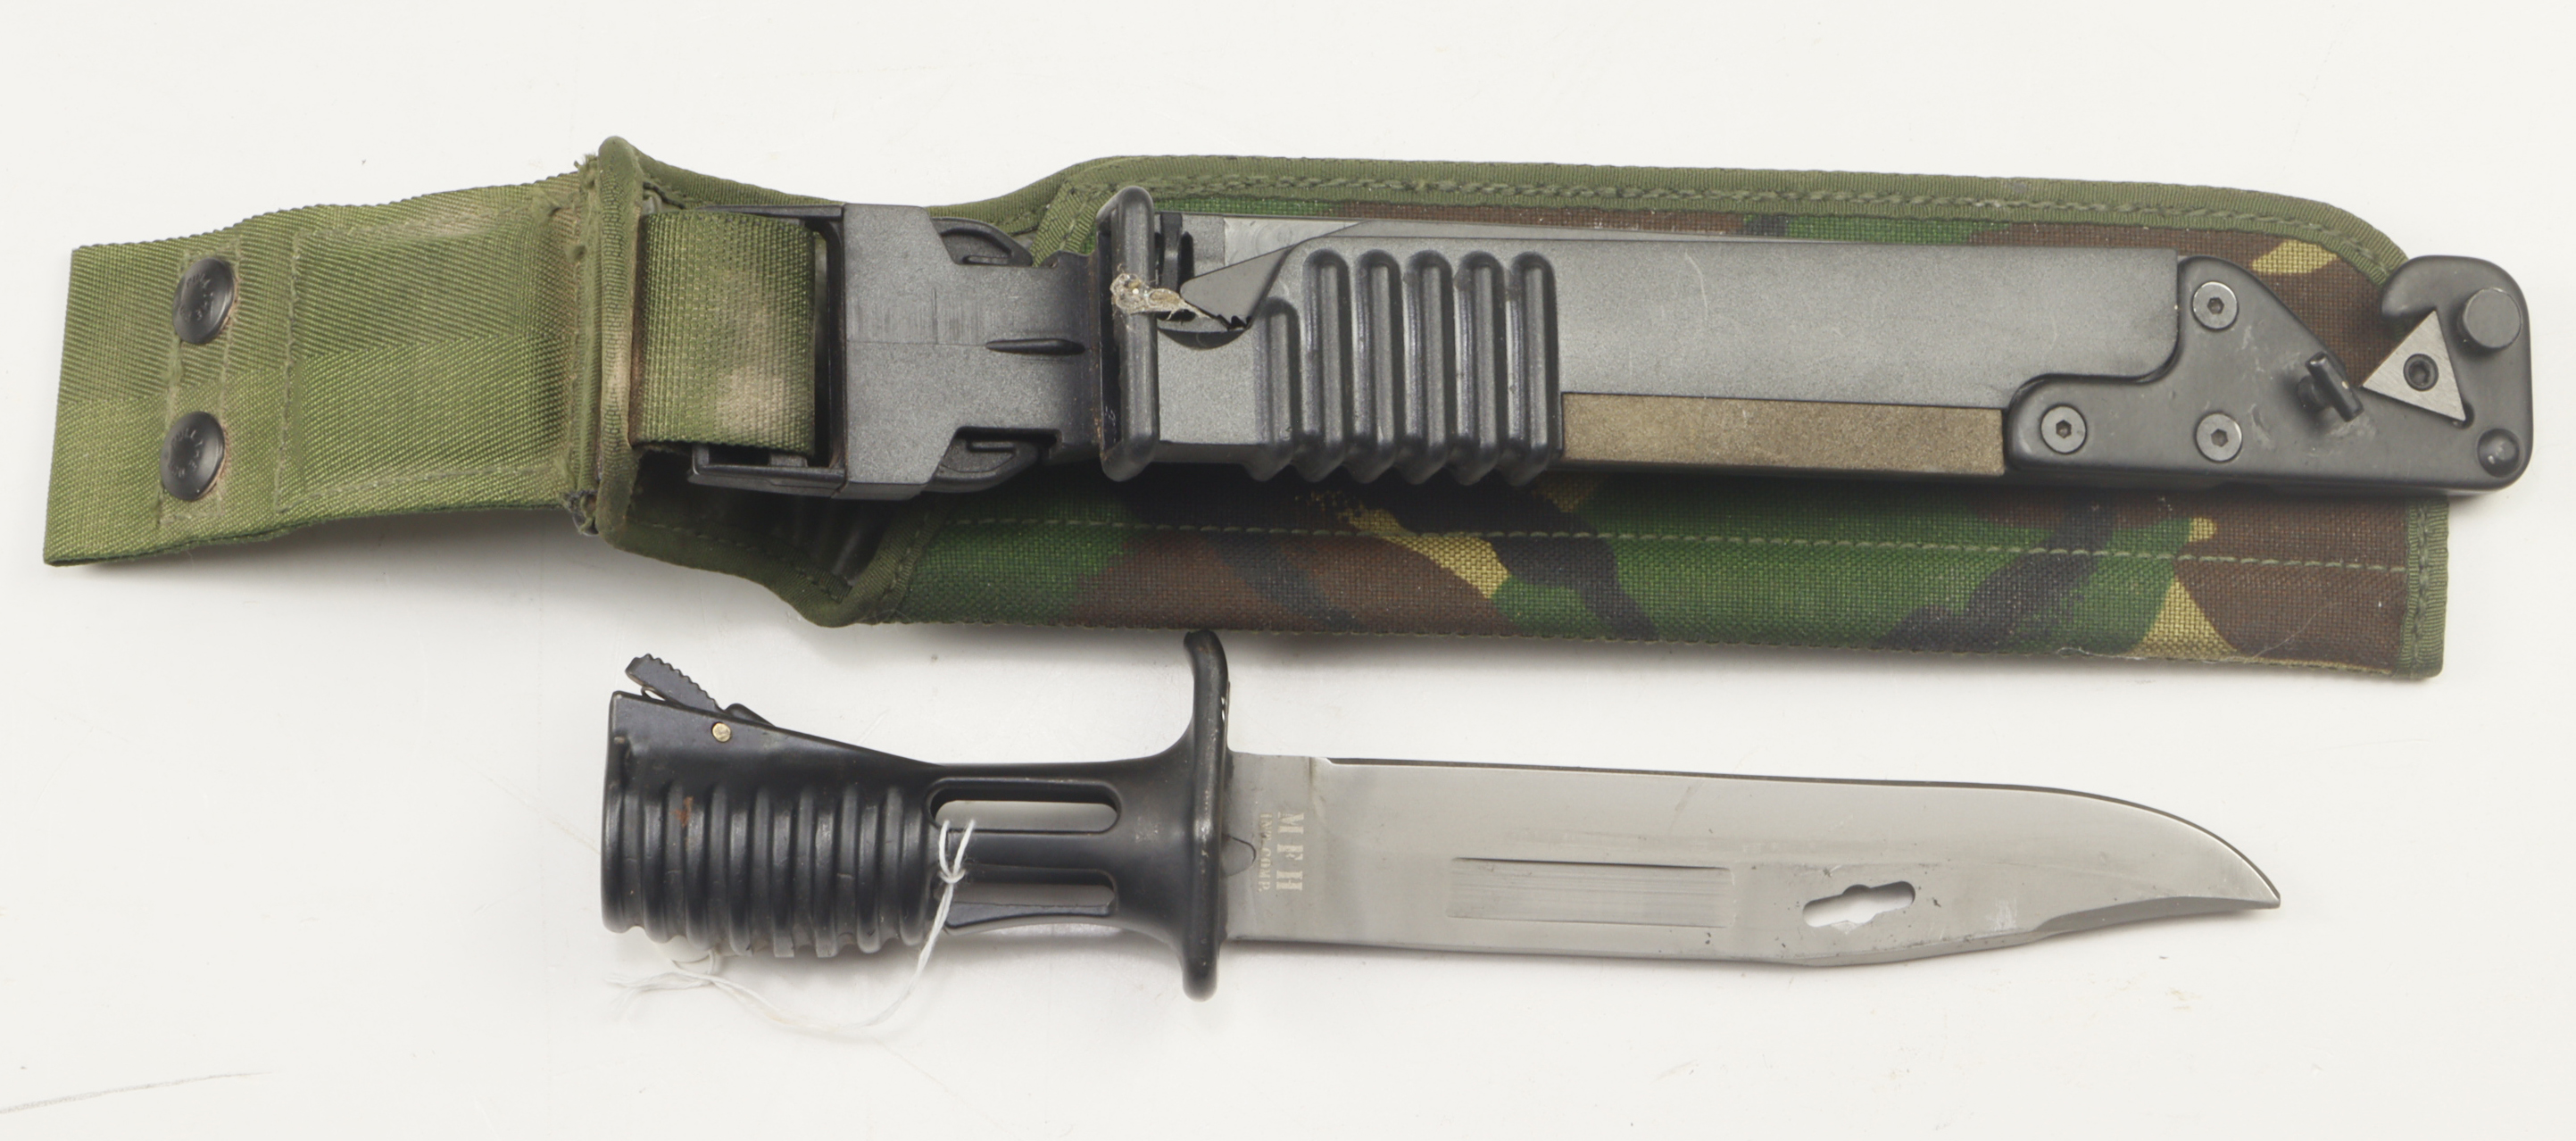 SA80 Bayonet, all steel construction, wire cutter, in its plastic scabbard with its canvas camo frog